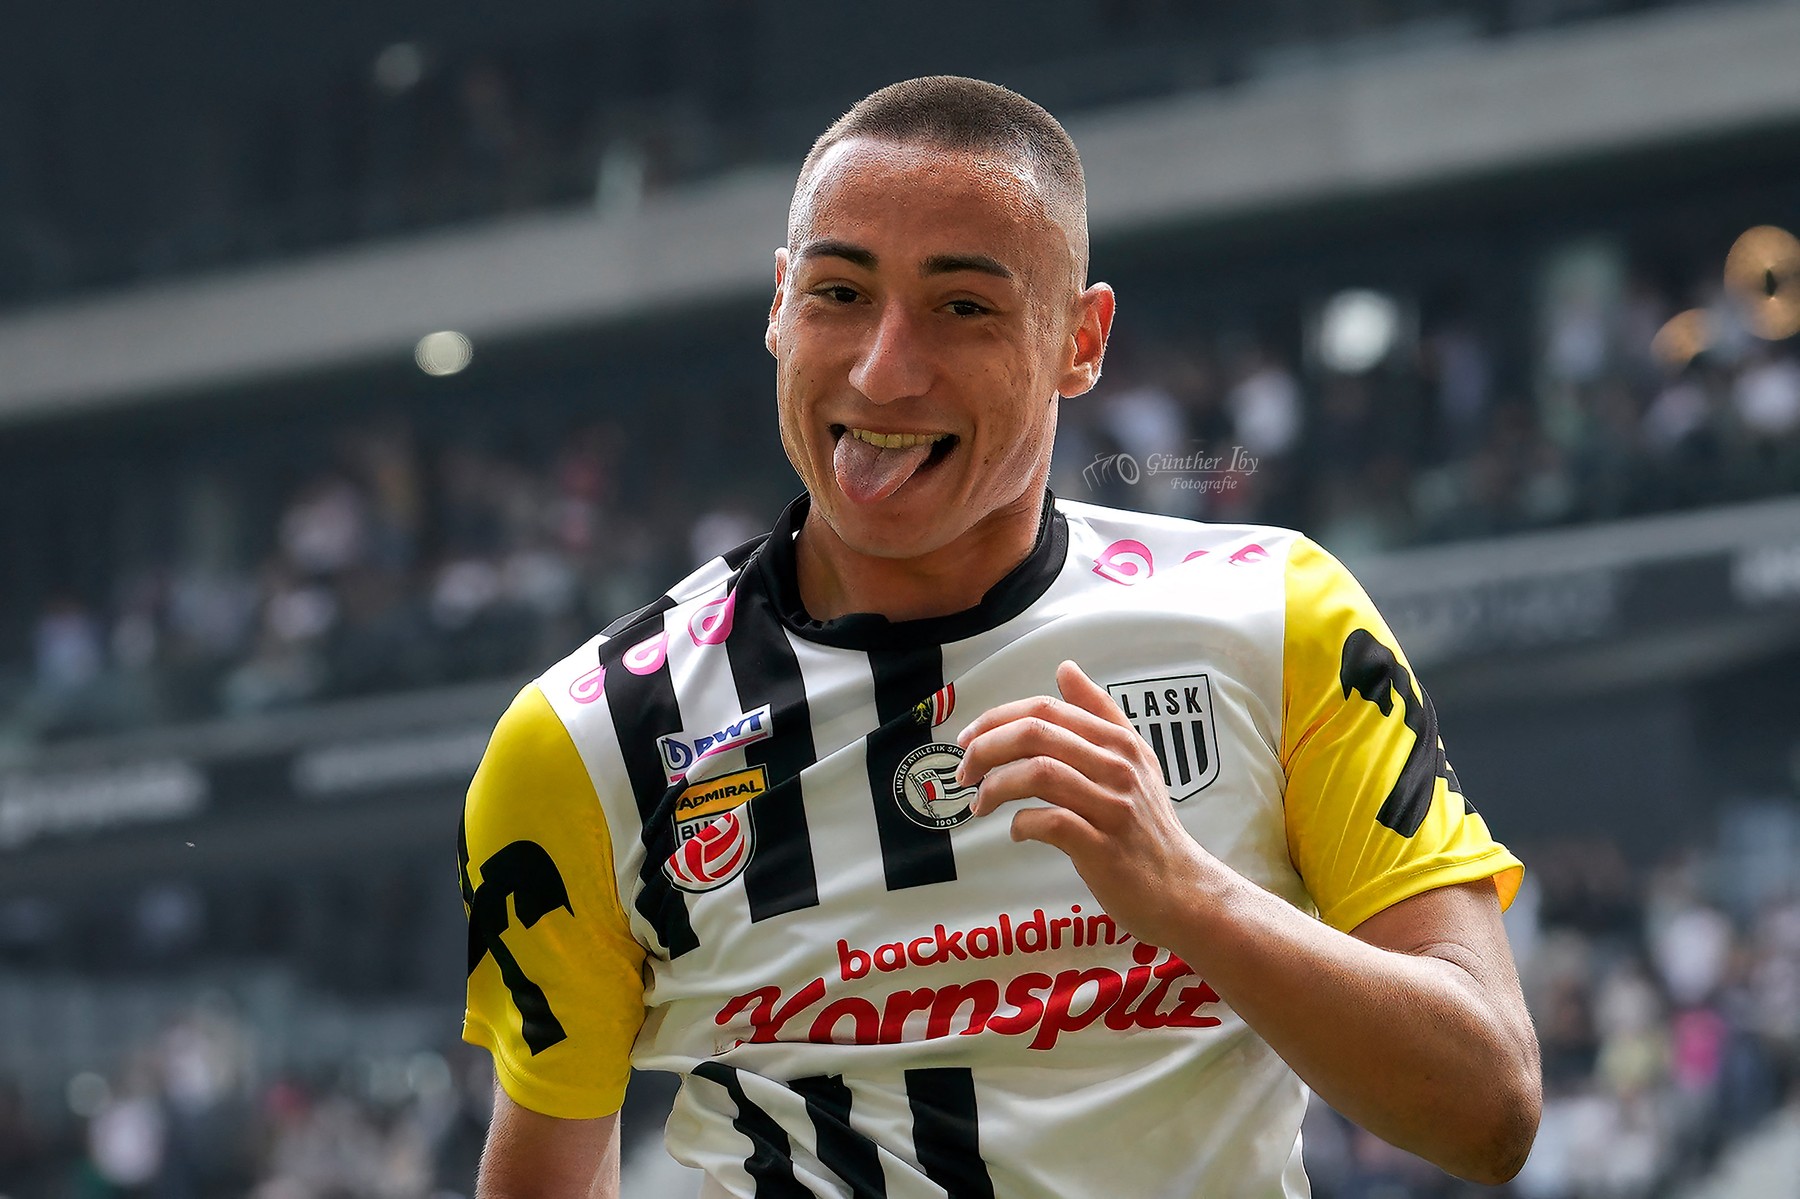 LINZ, AUSTRIA - APRIL 28: Marin Ljubicic of LASK celebrates his goal to 5:0 during the Admiral Bundesliga match between LASK and SK Rapid Wien at Raiffeisen Arena on April 28, 2024 in Linz, Austria.240428_SEPA_19_079 - 20240428_PD6338,Image: 868645396, License: Rights-managed, Restrictions: AUSTRIA OUT, GERMANY OUT, SWITZERLAND OUT, UK OUT
SOUTH TYROL OUT, Model Release: no, Credit line: Guenther Iby / AFP / Profimedia